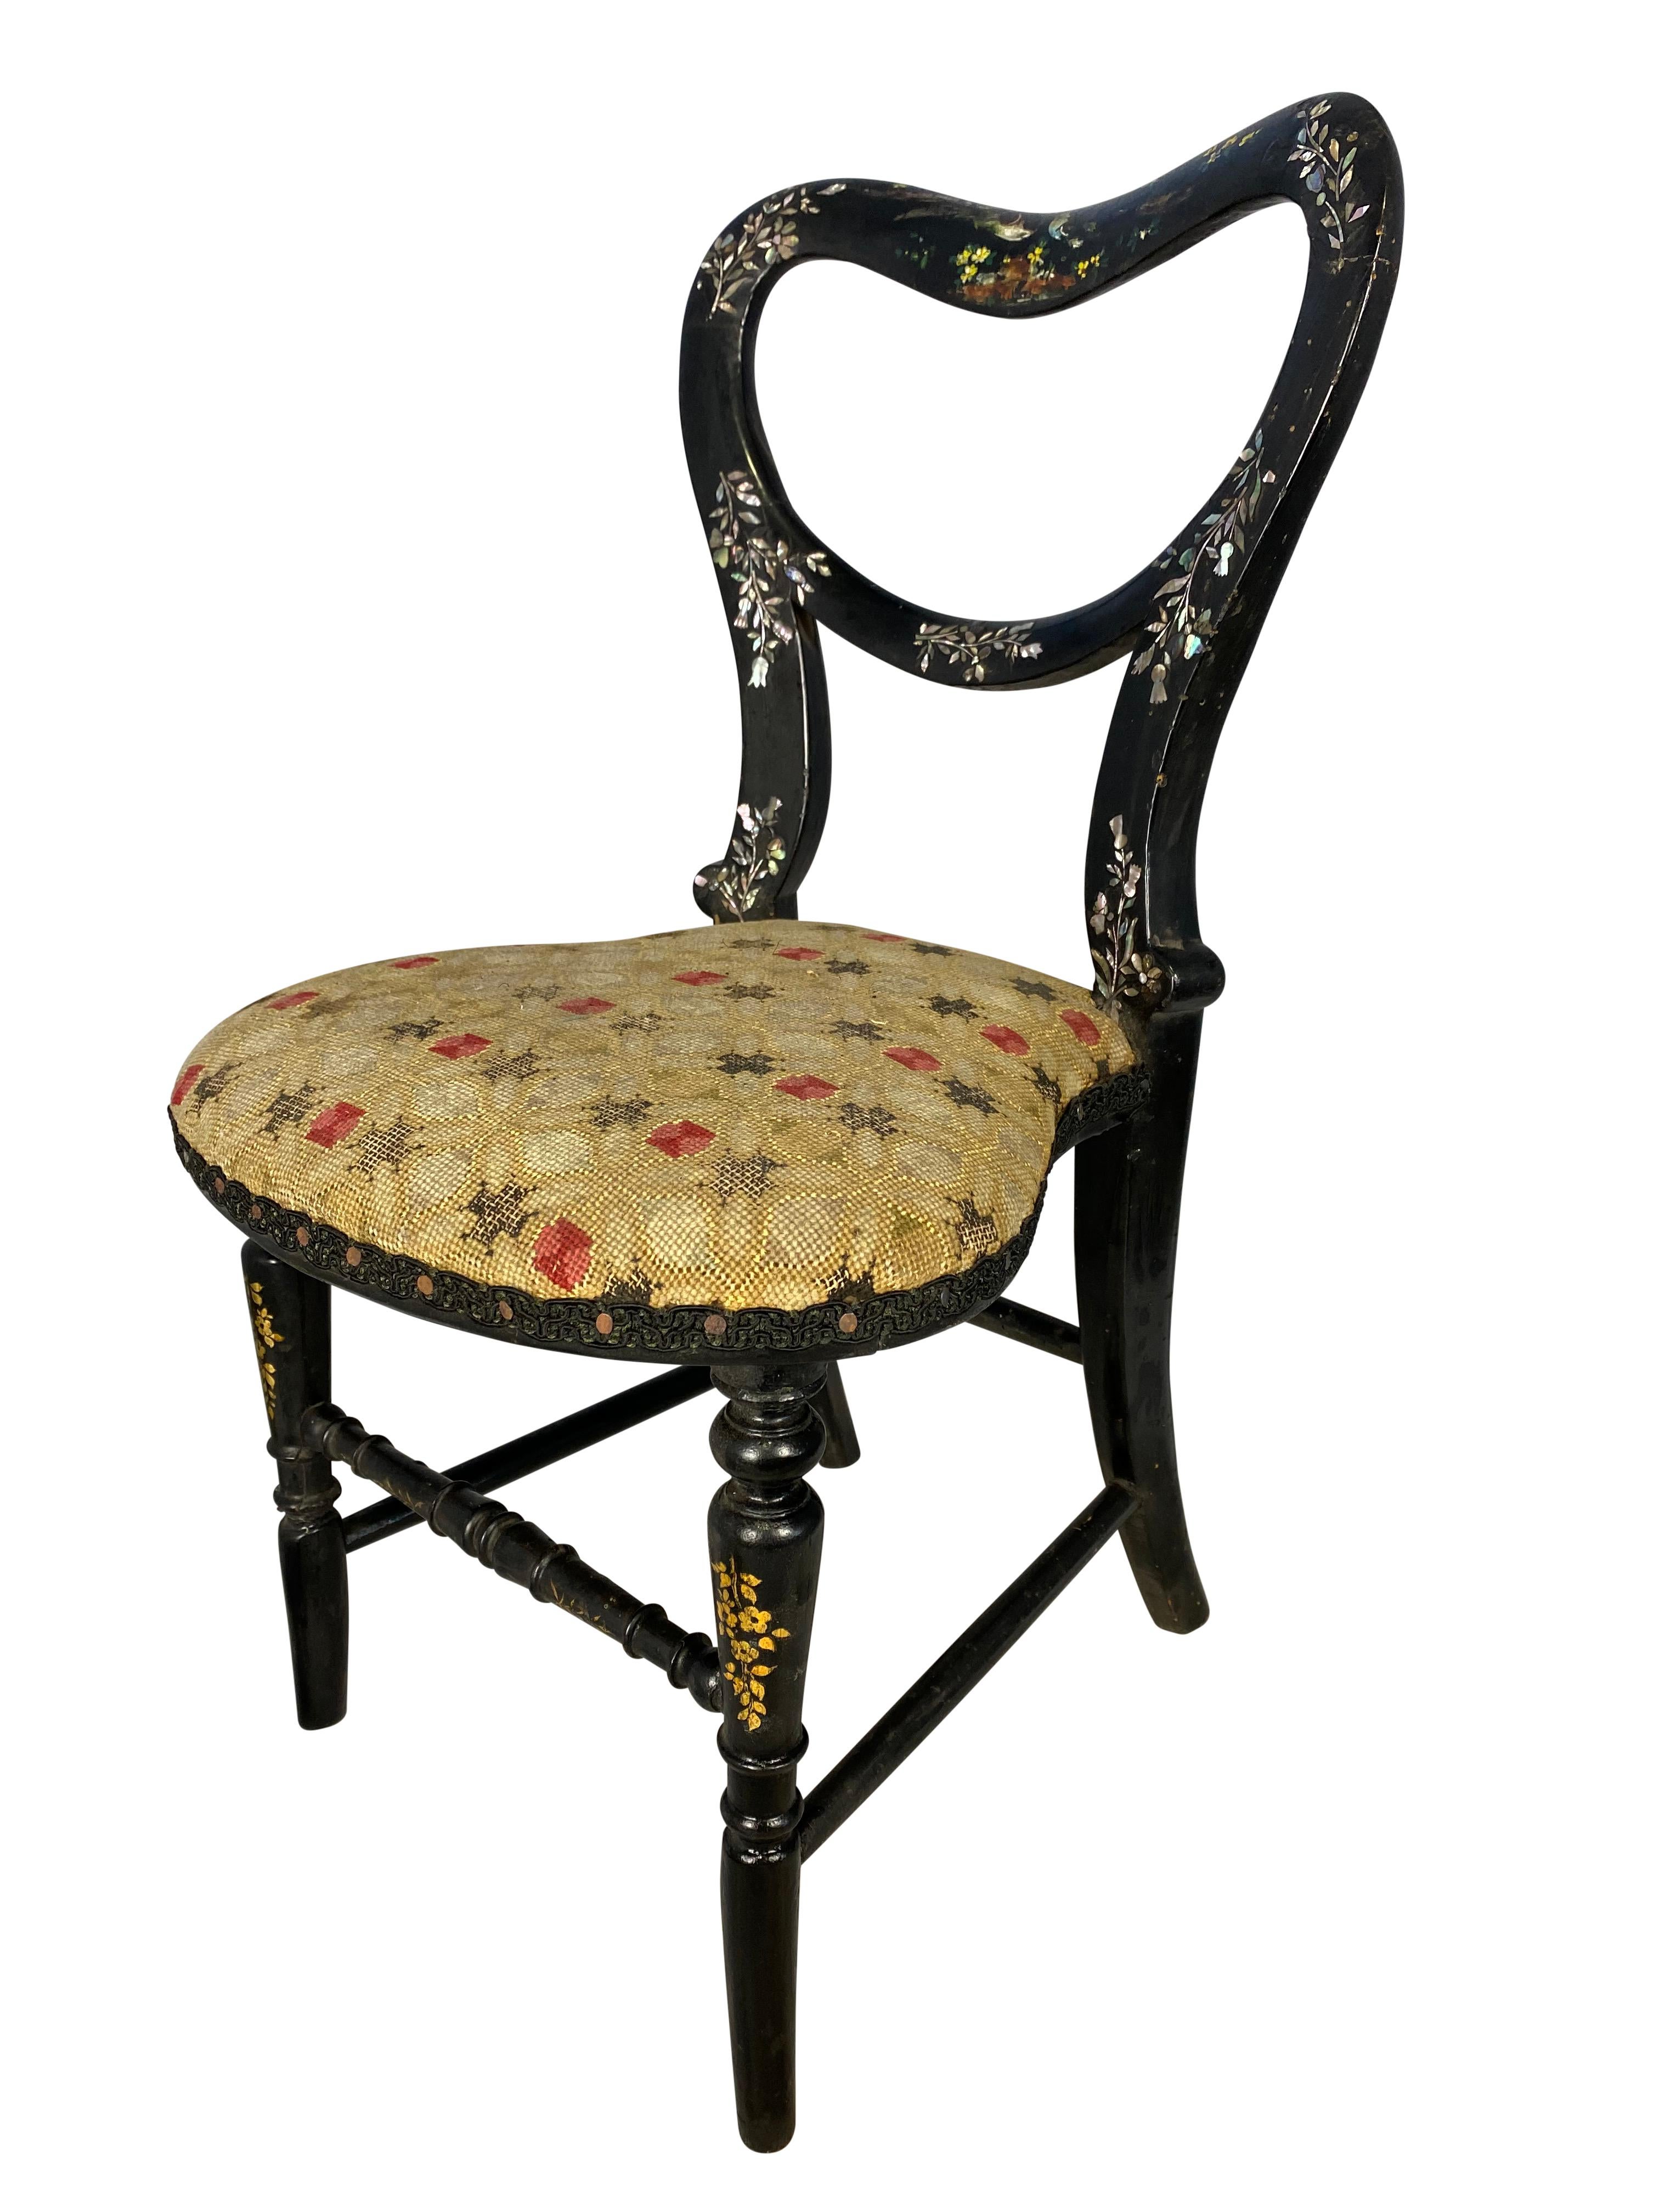 Hand Painted and Mother of Pearl Inlaid Miniature Chair, 19th Century For Sale 11